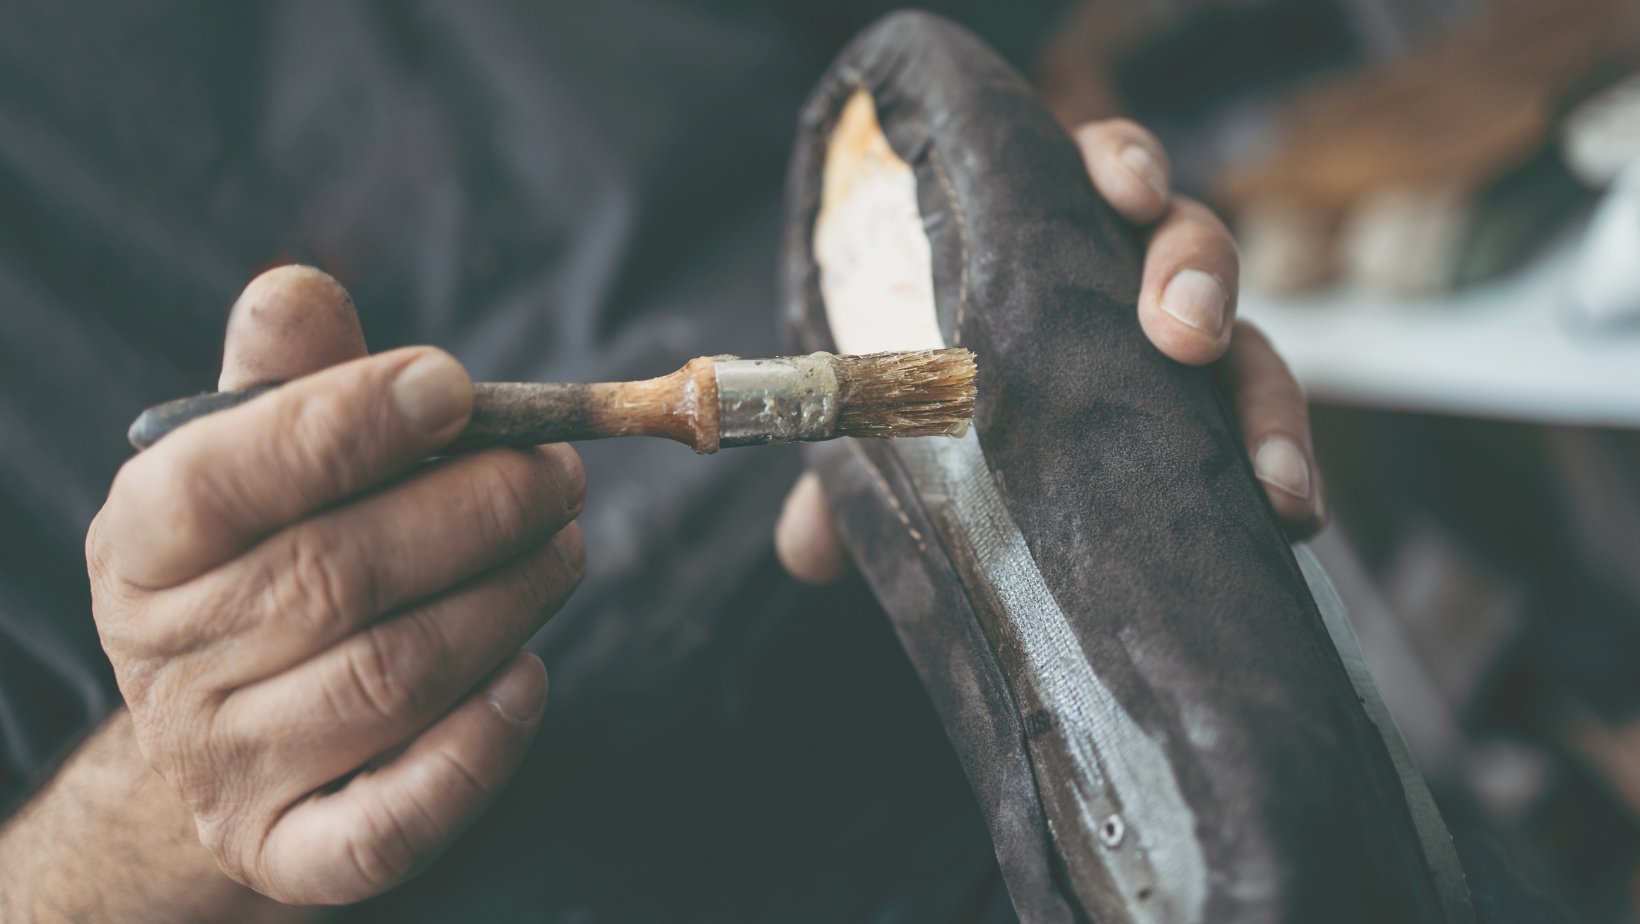 The art of shoe-making: a behind-the-scenes look at the craftsmanship and design process - The Quirky Naari